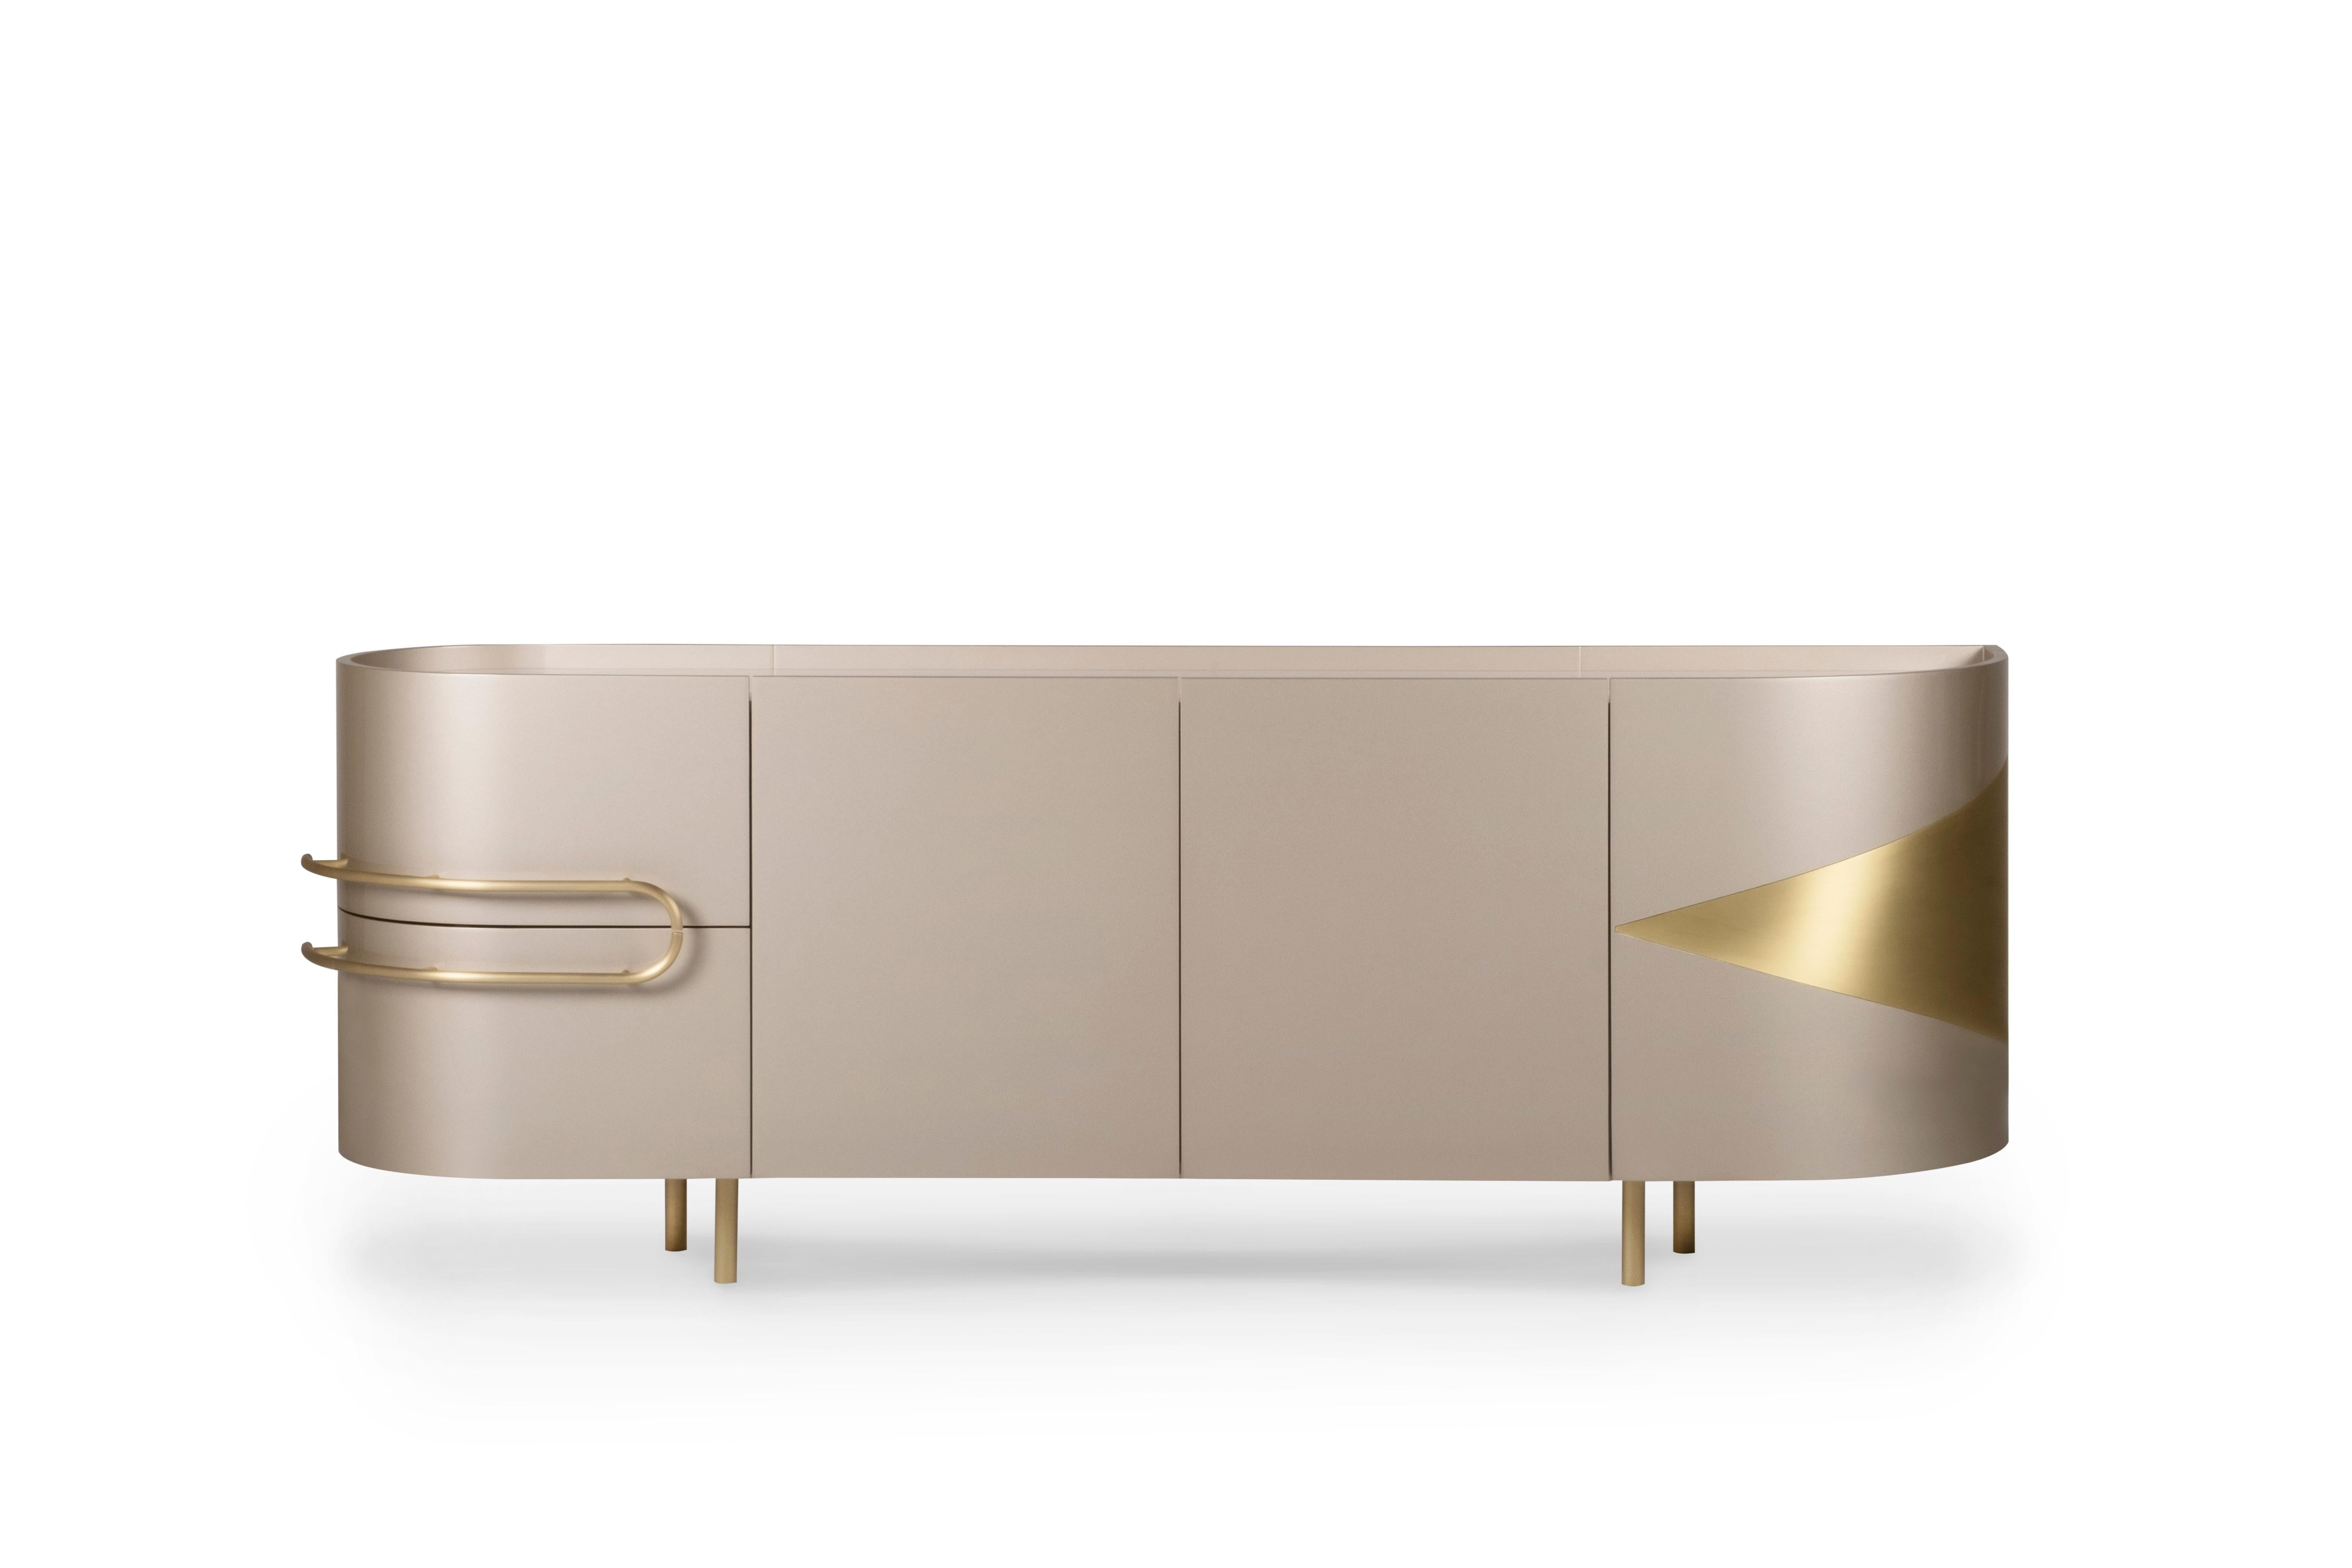 Olival Sideboard, Contemporary Collection, Handcrafted in Portugal - Europe by Greenapple.

Designed by Rute Martins for the Contemporary Collection, the Olival modern sideboard is inspired by the sacred symbolism of the ancient Greek olive tree,